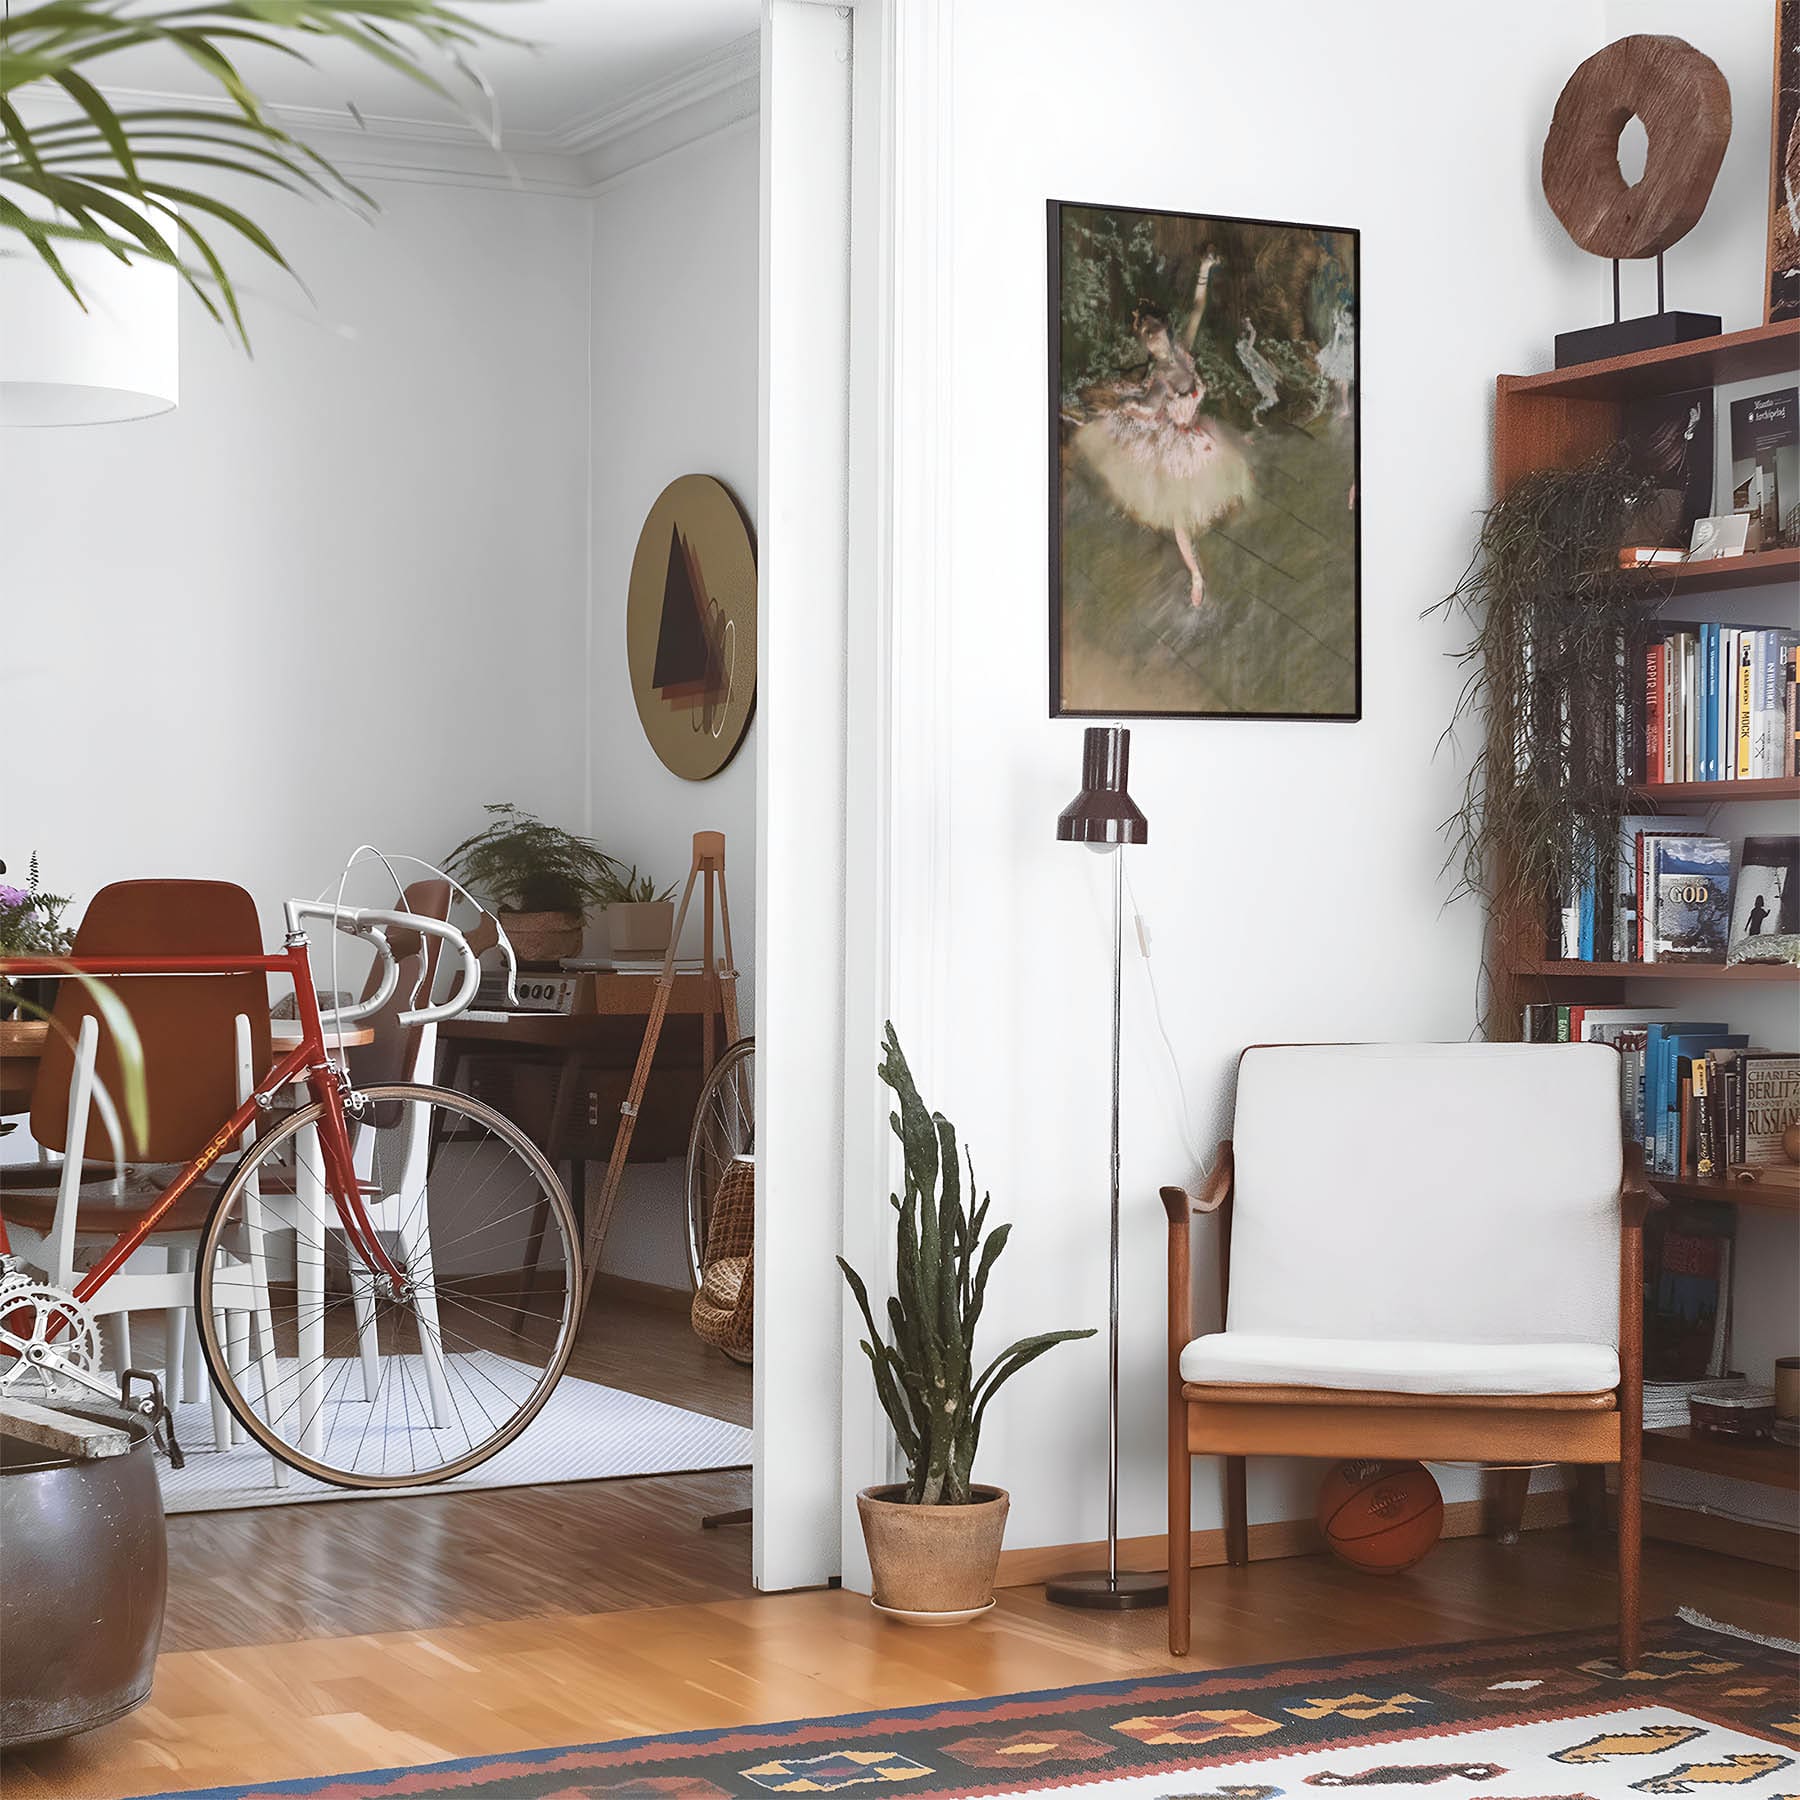 Eclectic living room with a road bike, bookshelf and house plants that features framed artwork of a Ballet Dancer above a chair and lamp